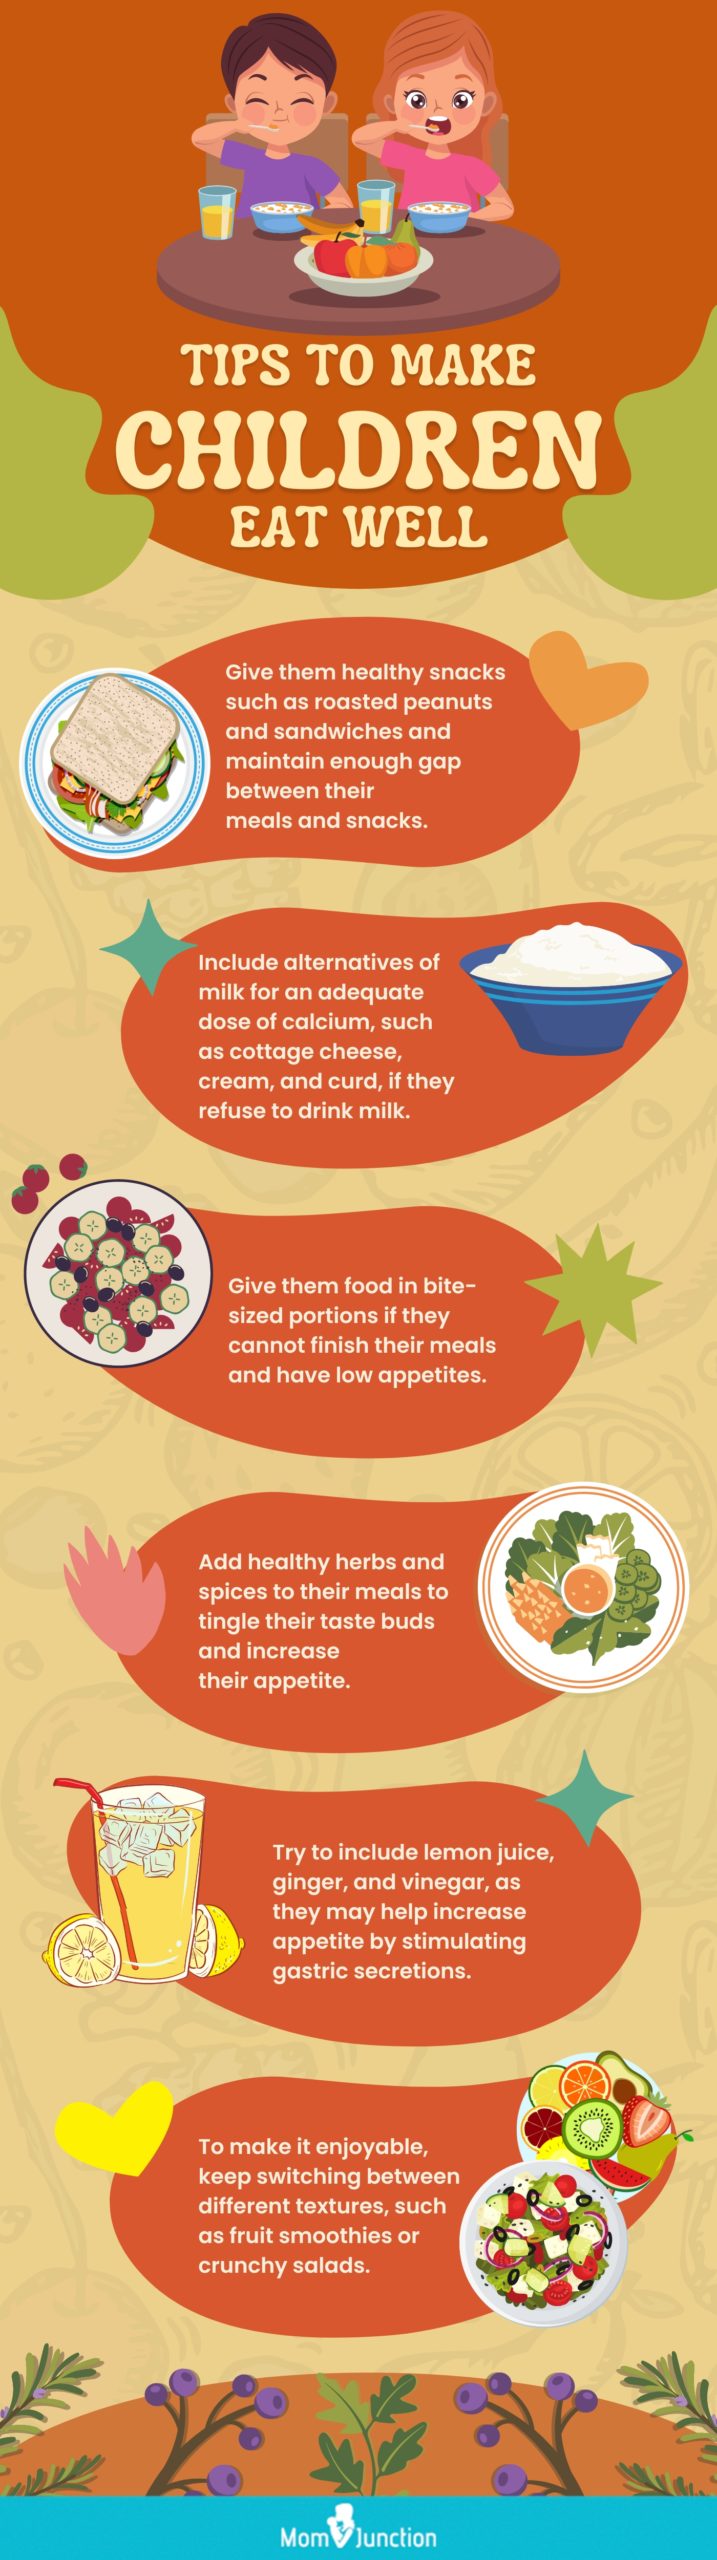 tips to make children eat well (infographic)